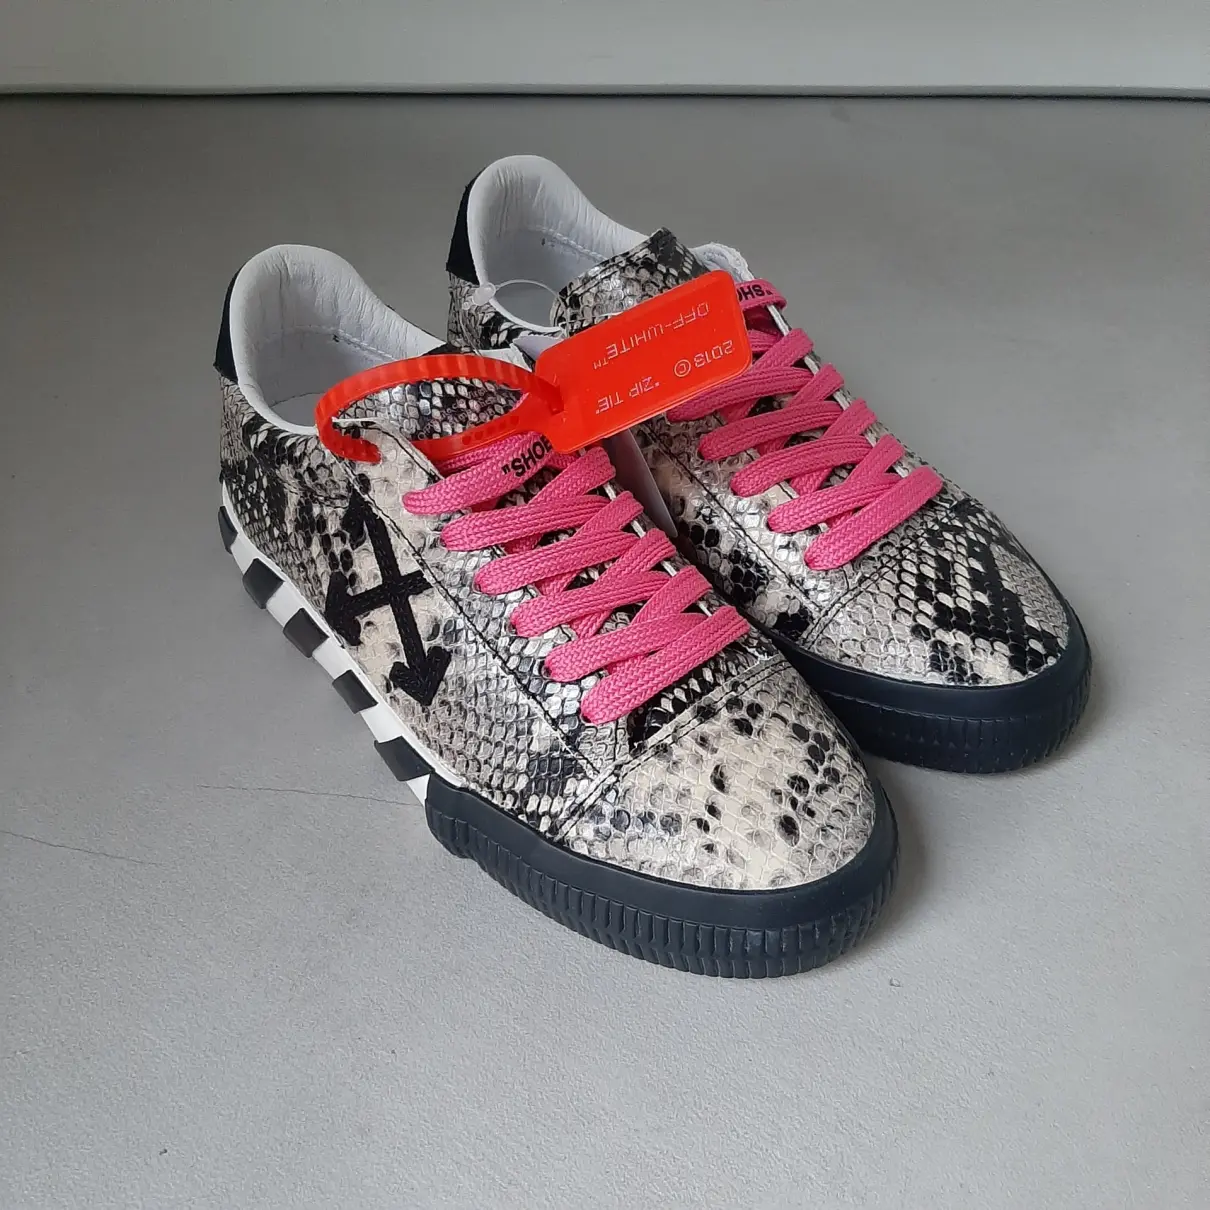 Buy Off-White Vulcalized leather trainers online